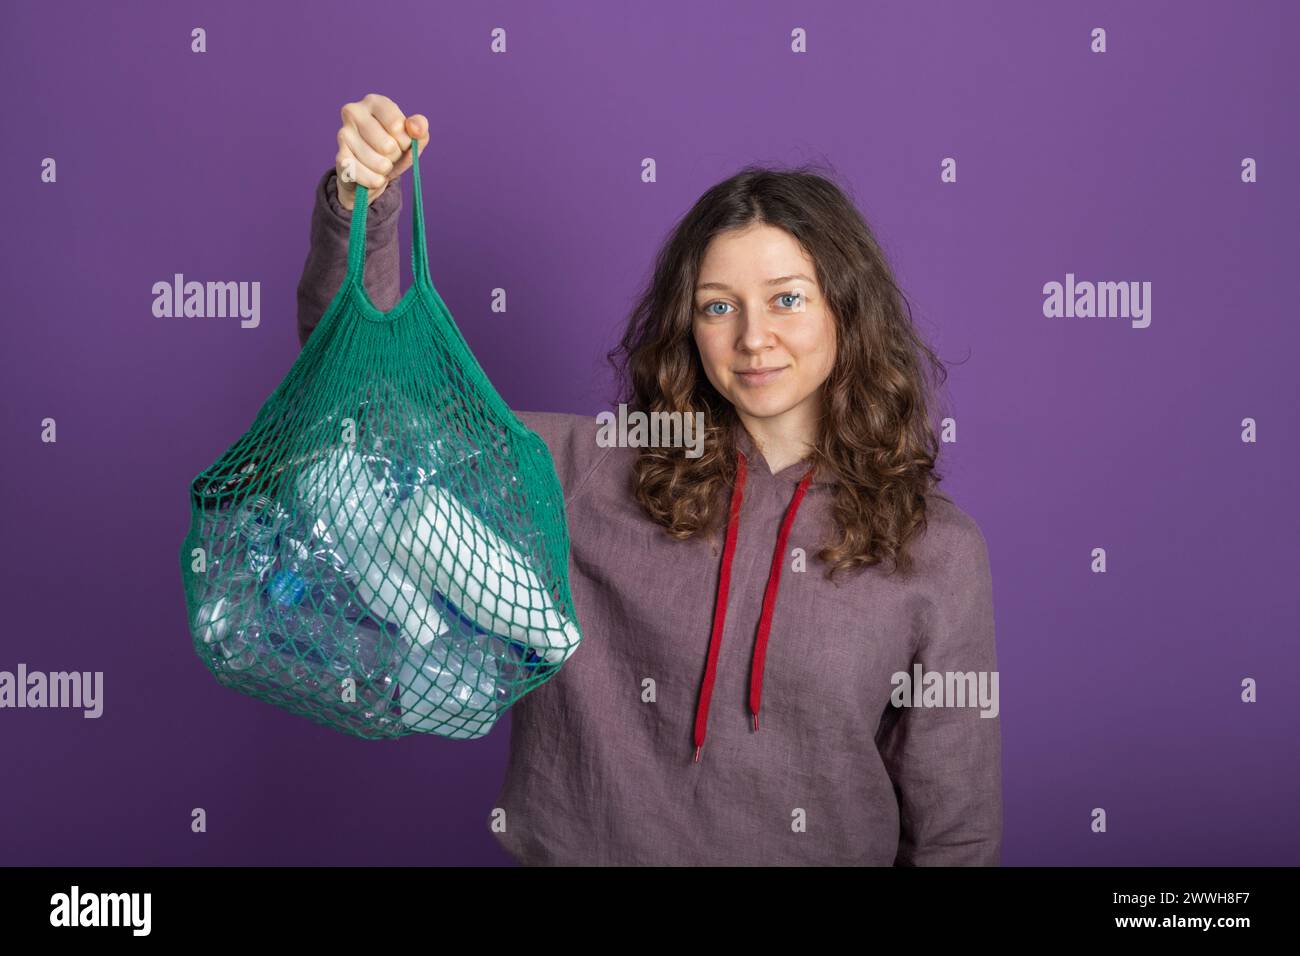 A woman with a gentle smile holds a green reusable mesh bag full of empty plastic bottles, promoting recycling and sustainability against a purple backdrop. Woman with Reusable Mesh Bag Stock Photo